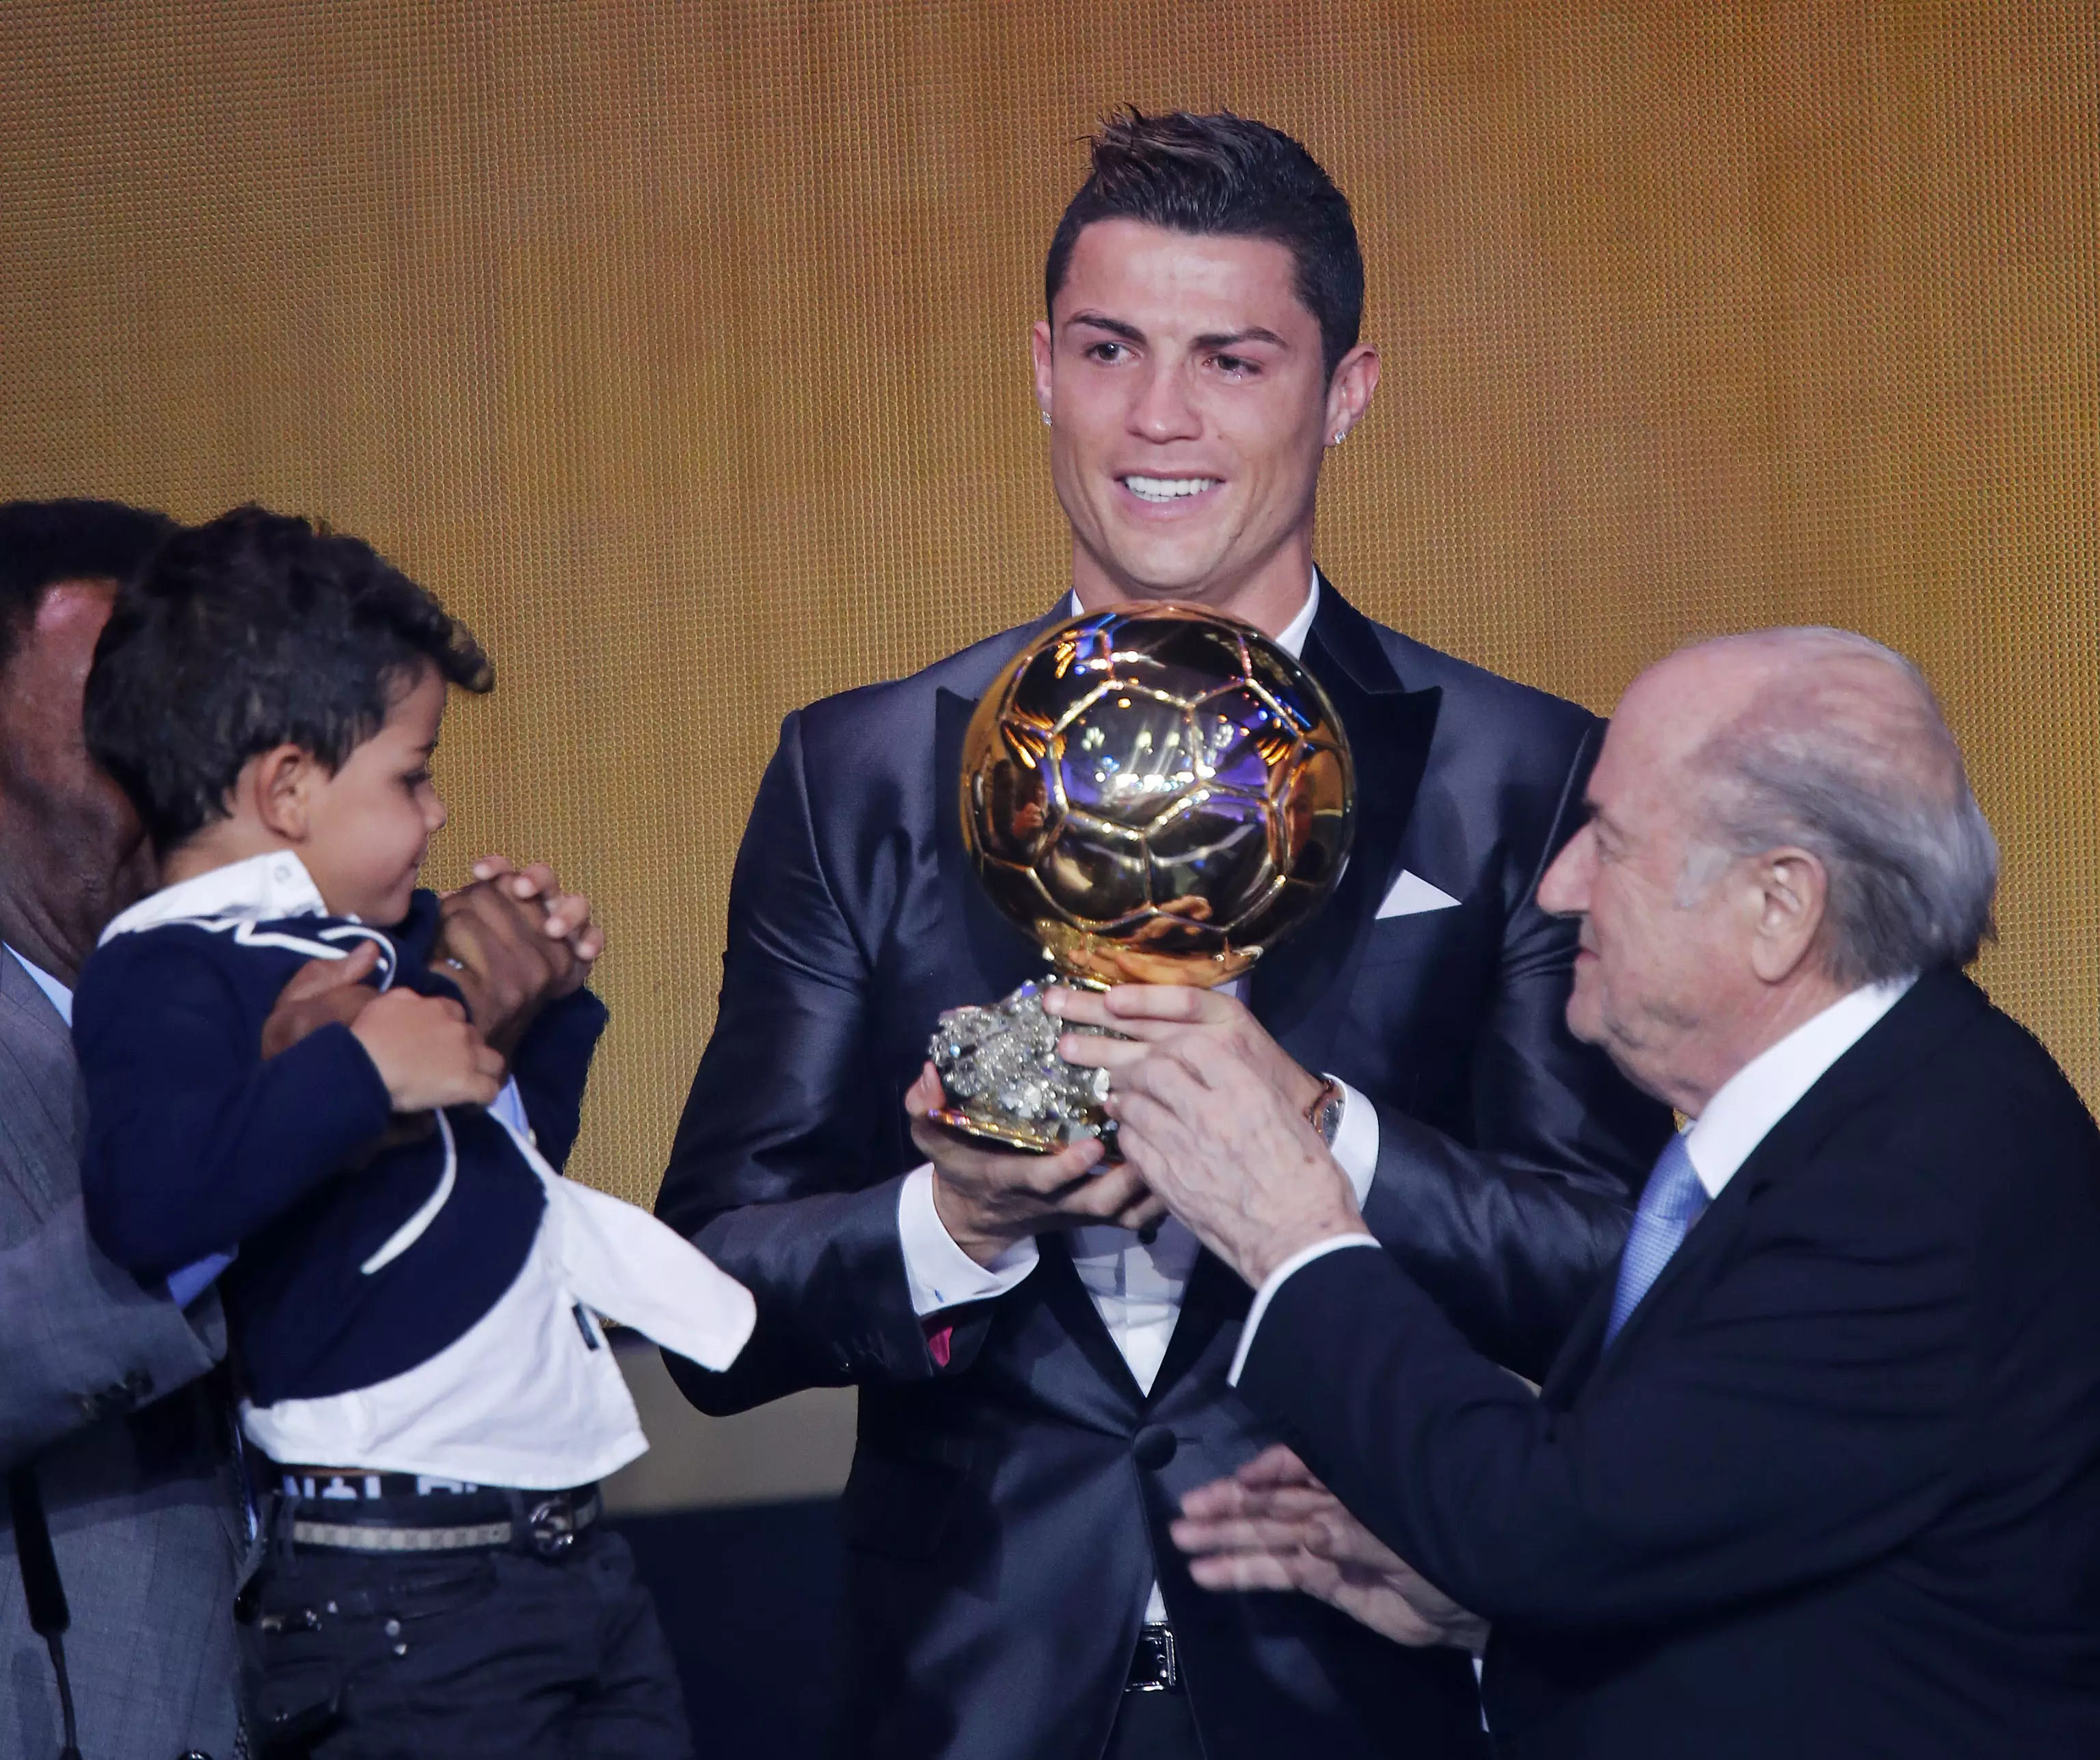 Ronaldo with one of his Ballon d'Ors. Image: PA Images